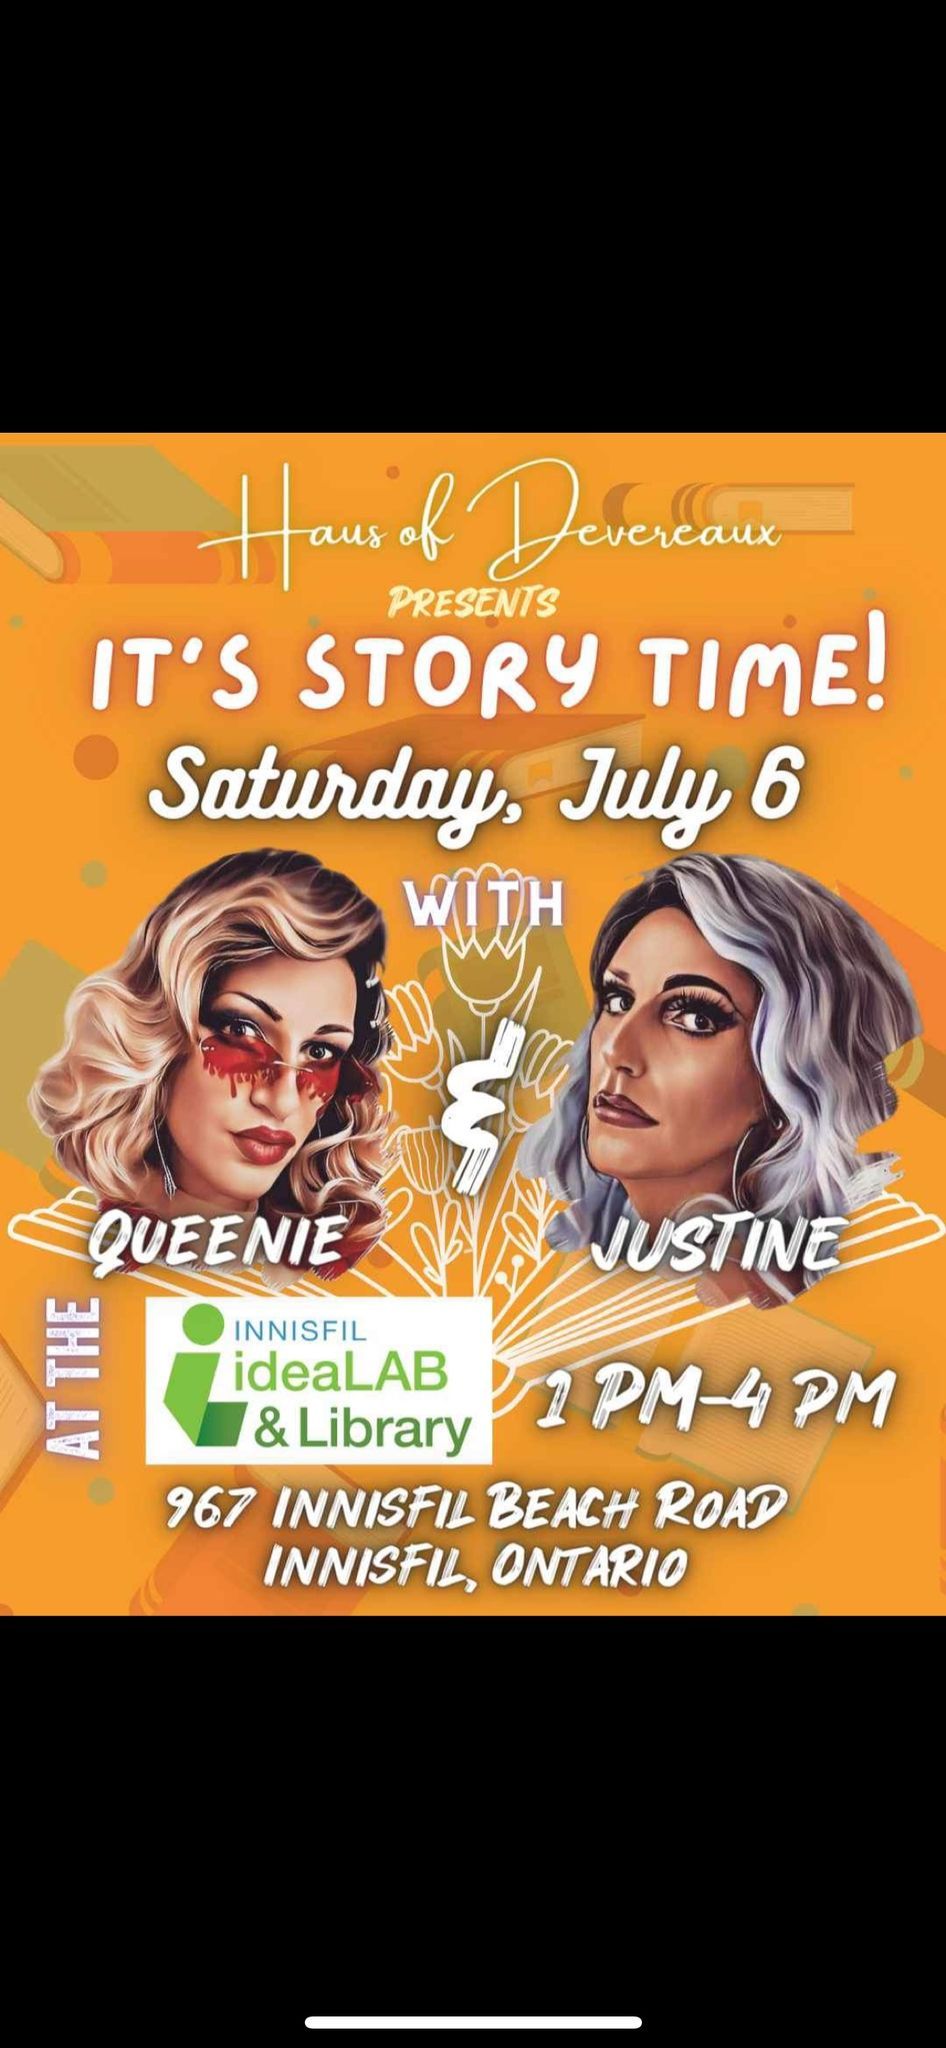 Drag Queen Story Time with Justine and Queenie!